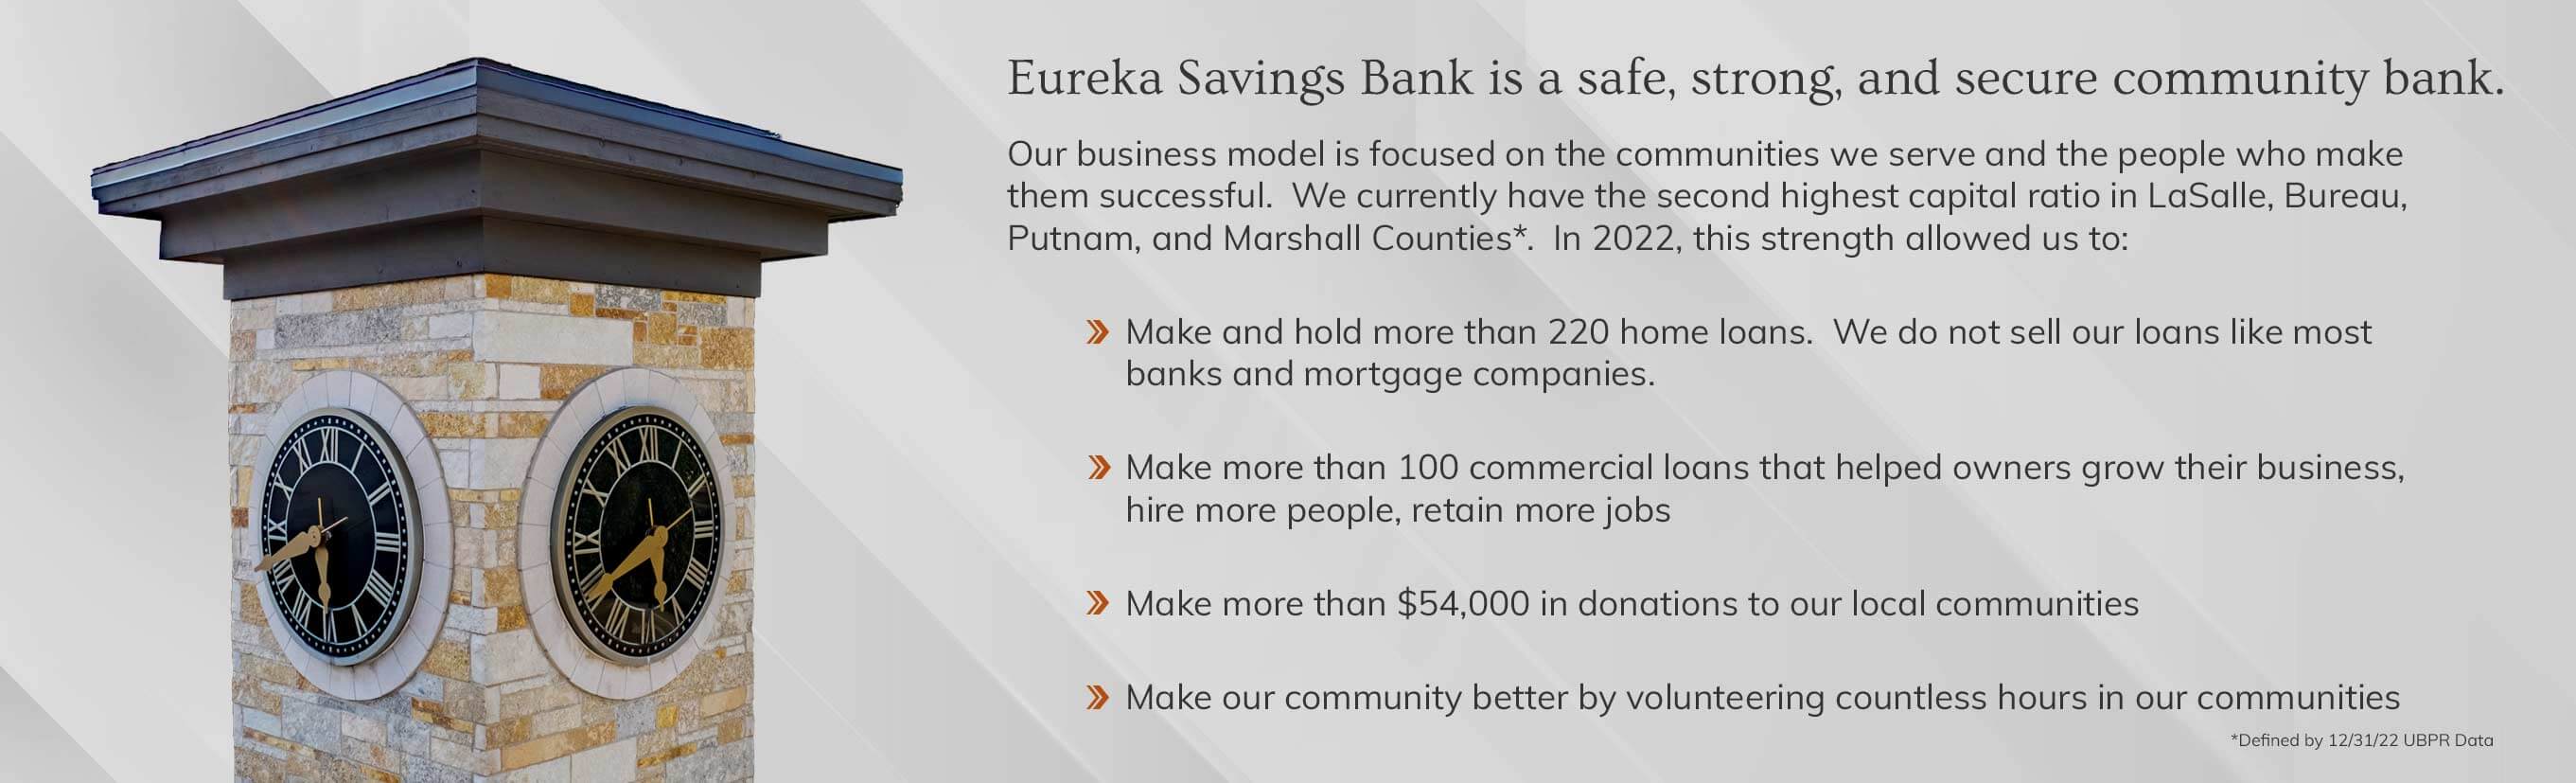 Eureka Savings Bank is a safe, strong and secure community bank. Our business model is focused on the communities we serve and the people who make them successful. 